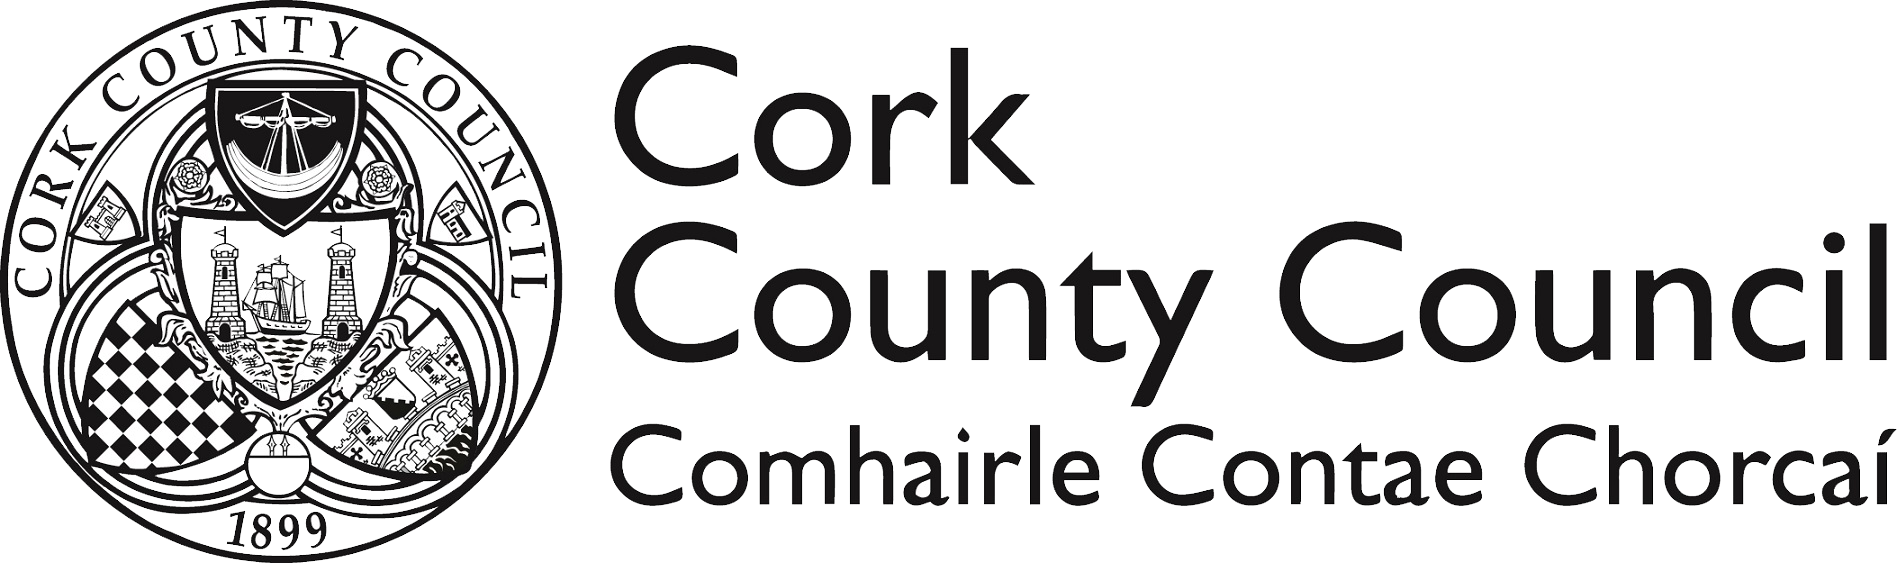 Cork County Council [Converted]B&W copy (1).png